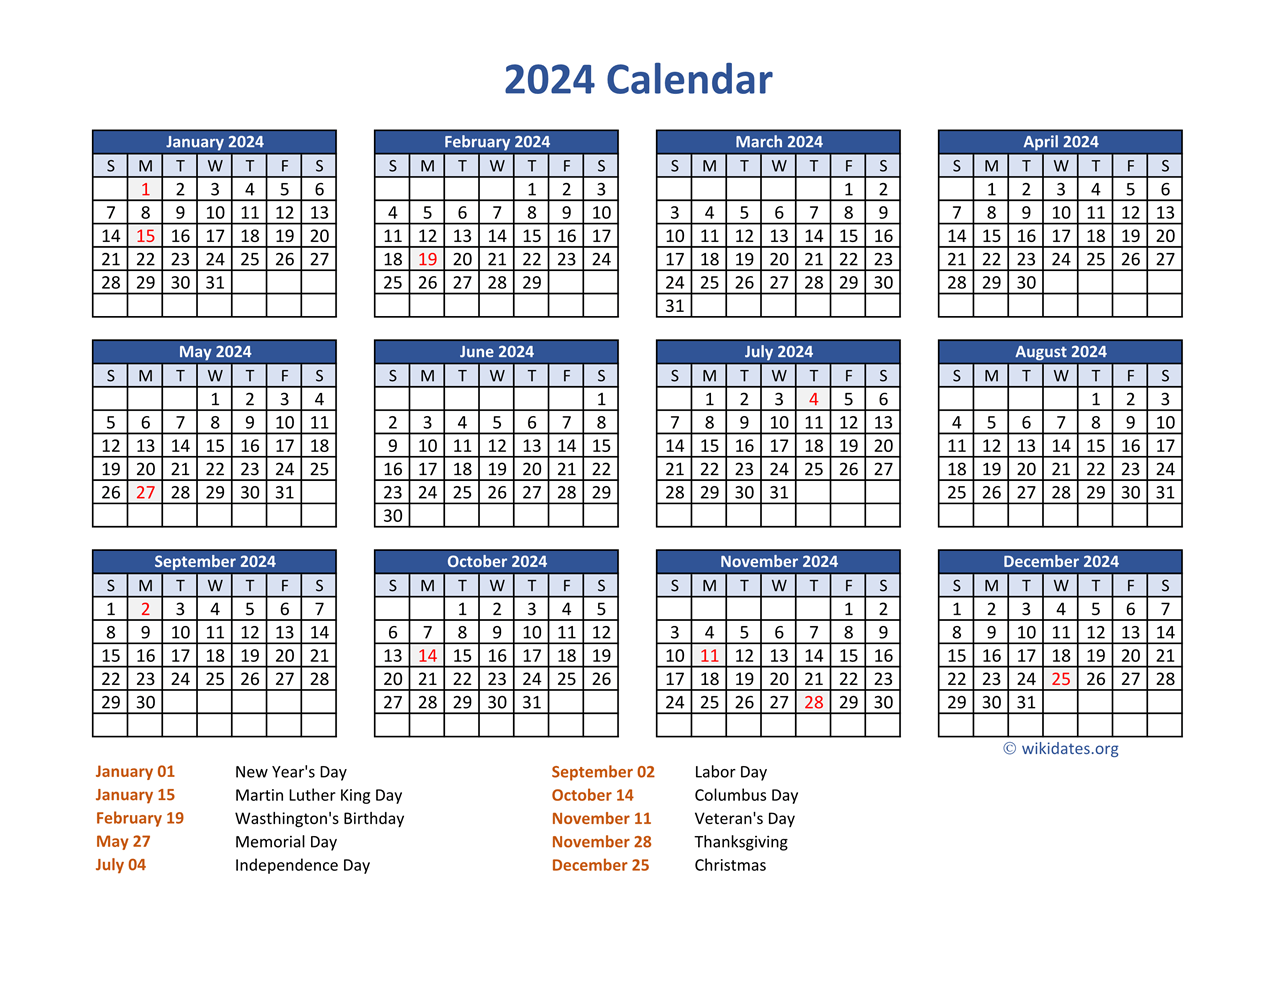 Pdf Calendar 2024 With Federal Holidays | Wikidates for 2024 Calendar With Holidays Printable